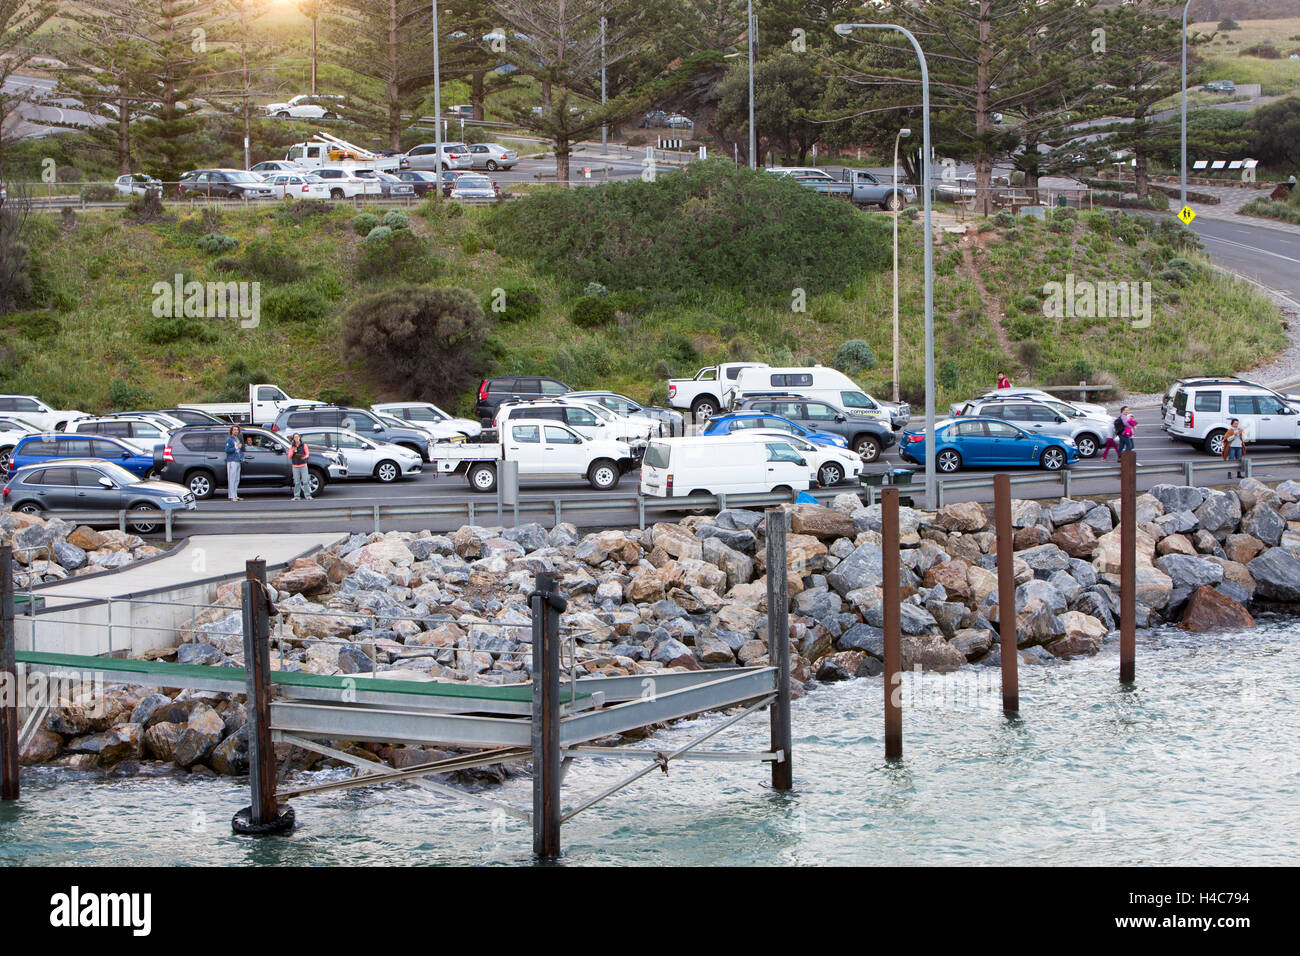 Cars and drivers at Cape Jervis Adelaide waiting to board sealink ferry to kangaroo island,south australia Stock Photo